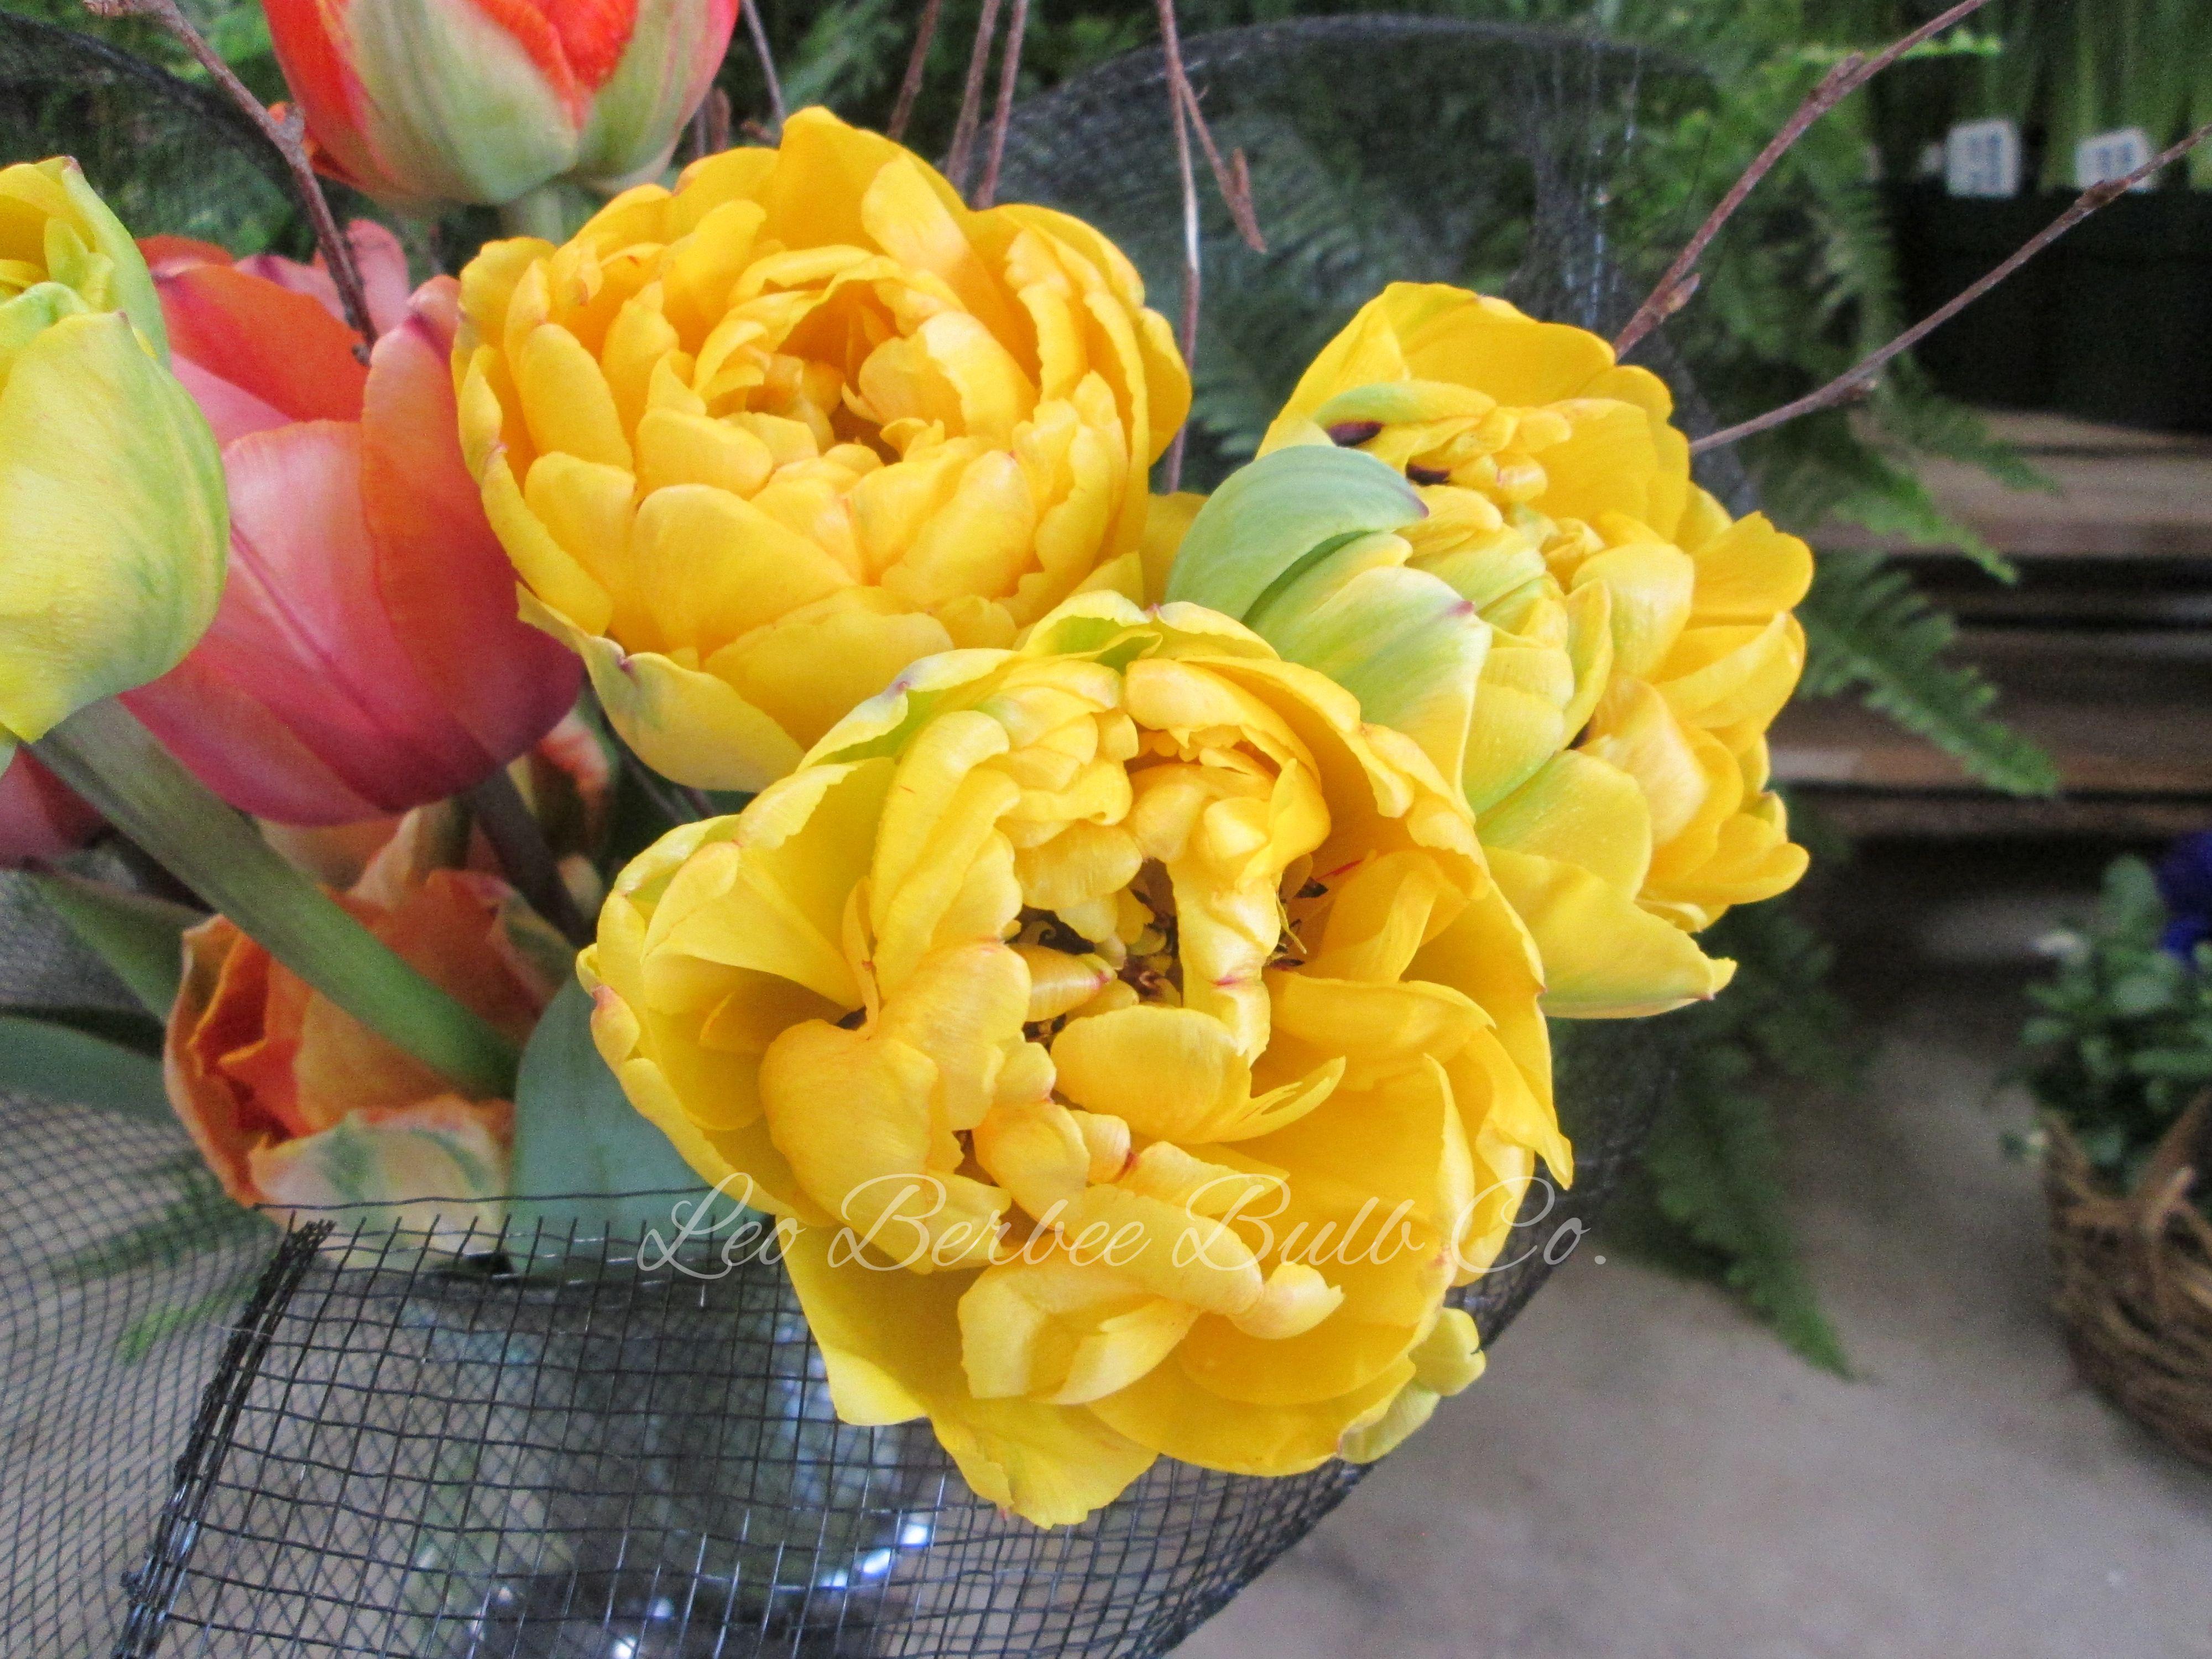 Tulip Double Late Yellow Pomponette from Leo Berbee Bulb Company